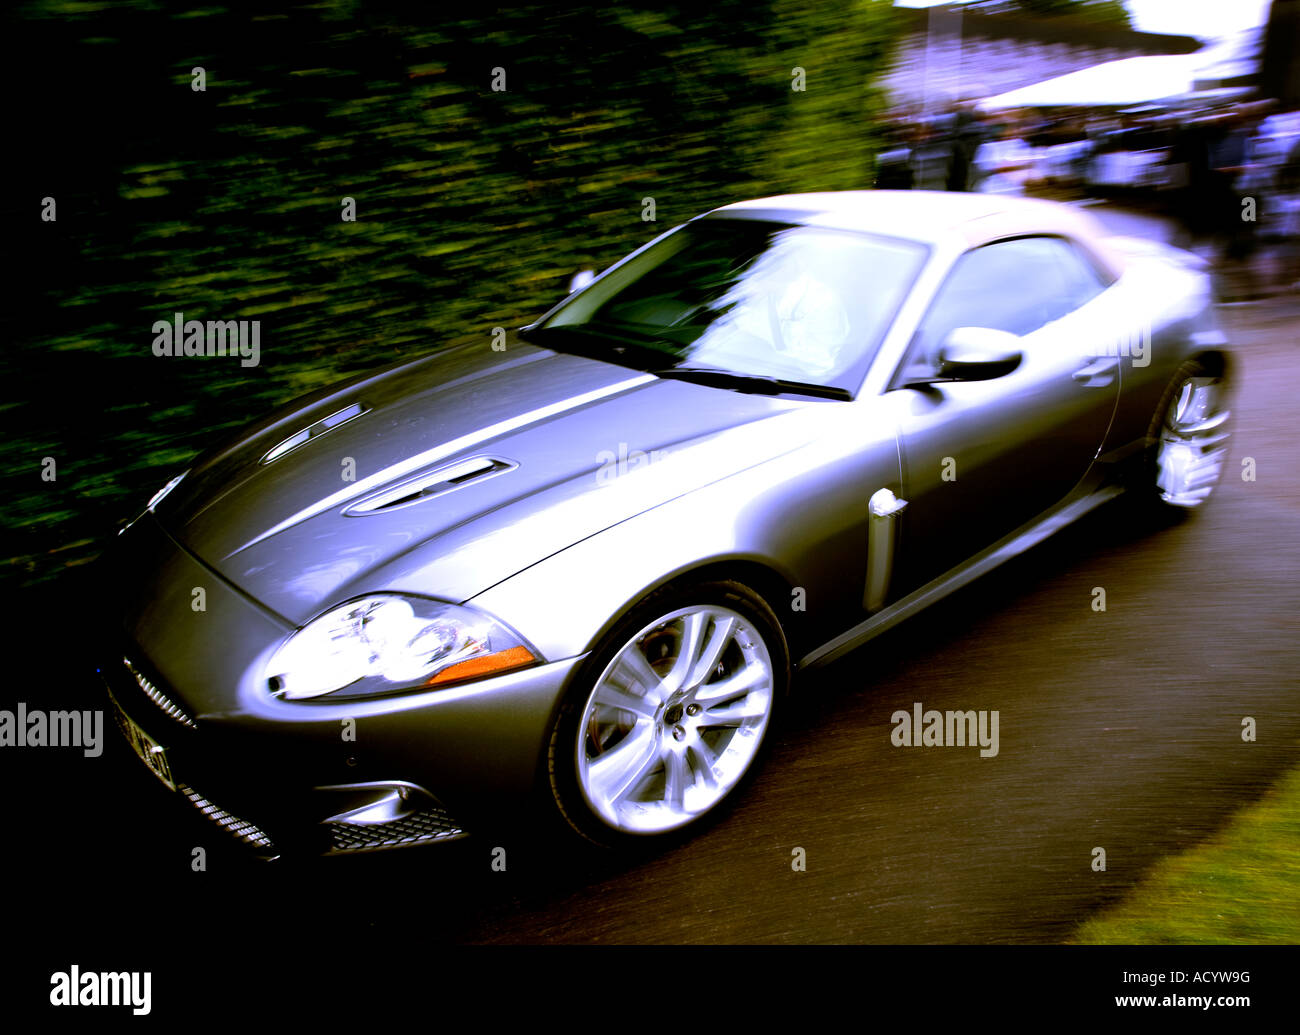 2007 Jaguar XKR leaves the paddock area at Goodwood Festival of Speed, Sussex, UK. Colour toned. Stock Photo